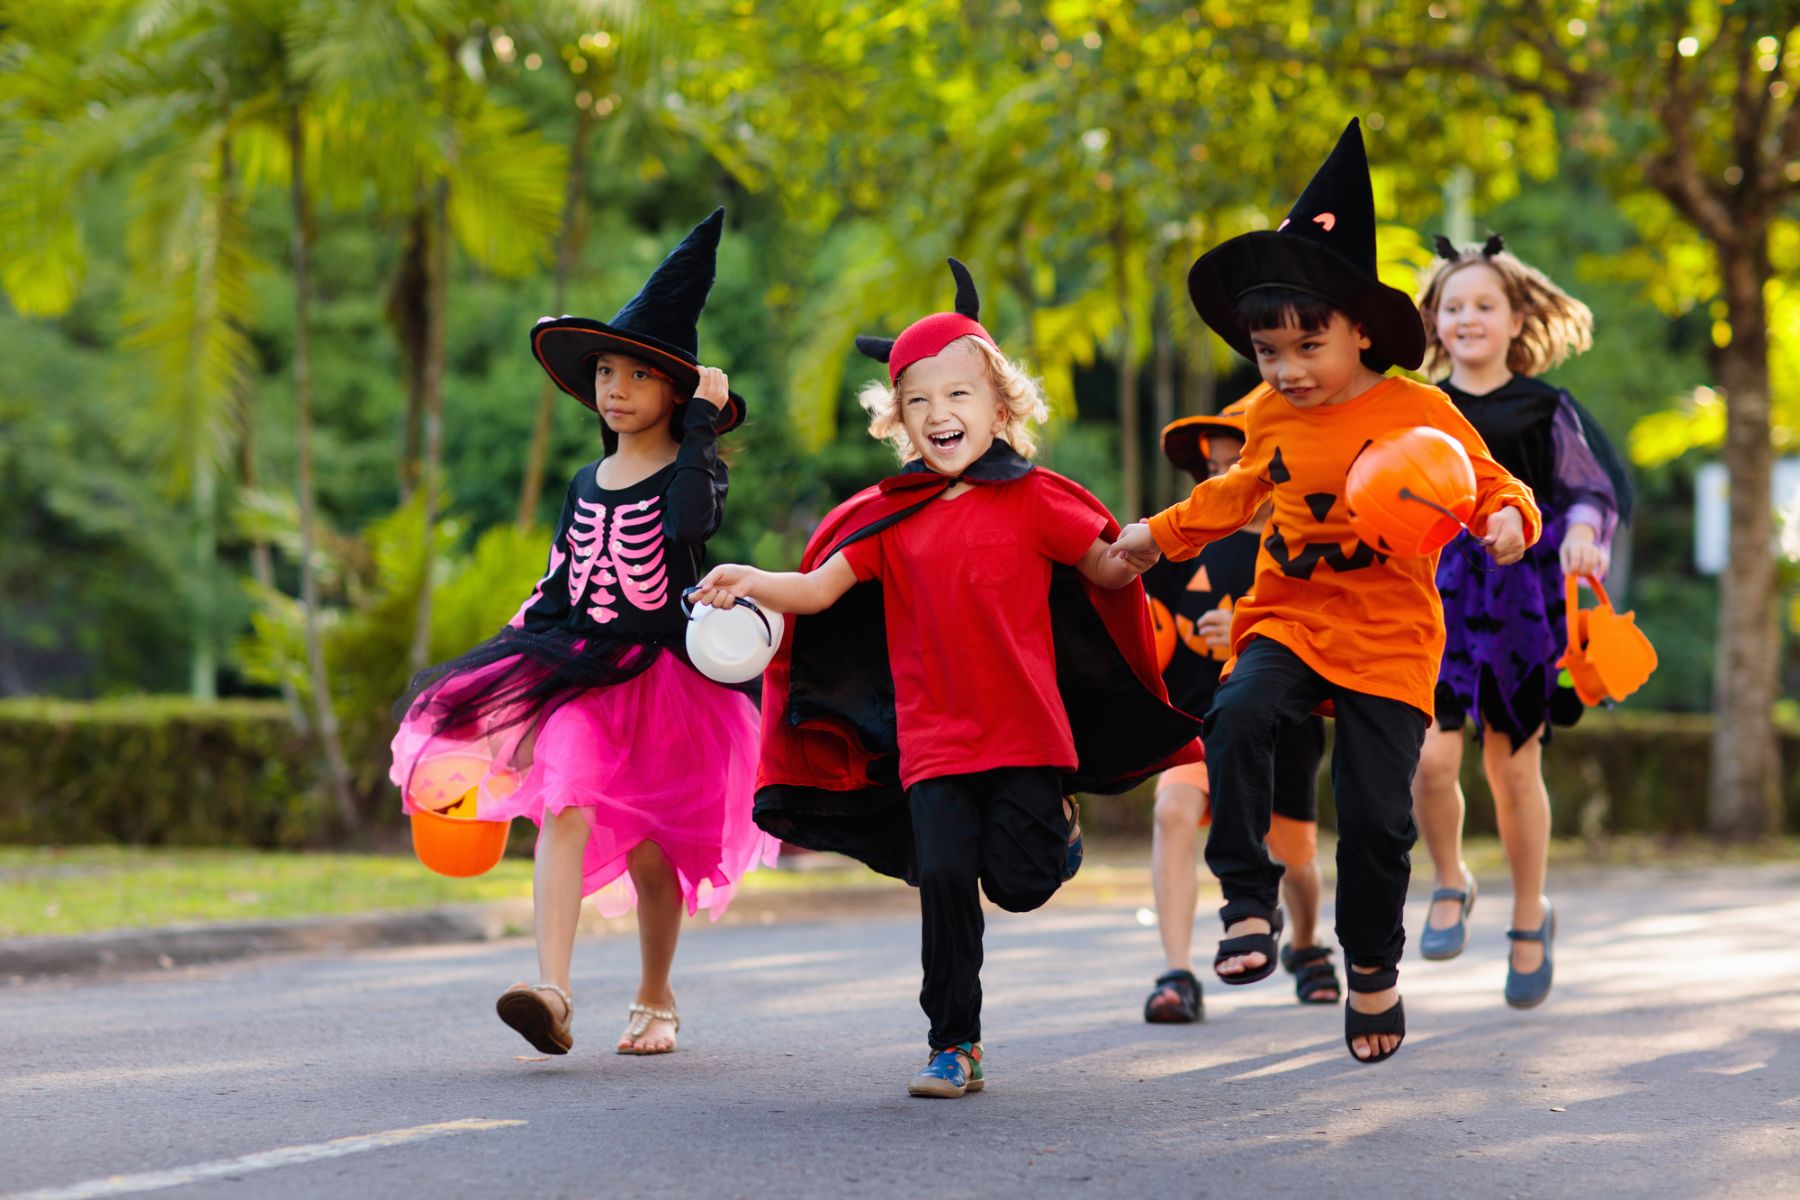 Tips for Driving Safely on Halloween - Driver Education Safety